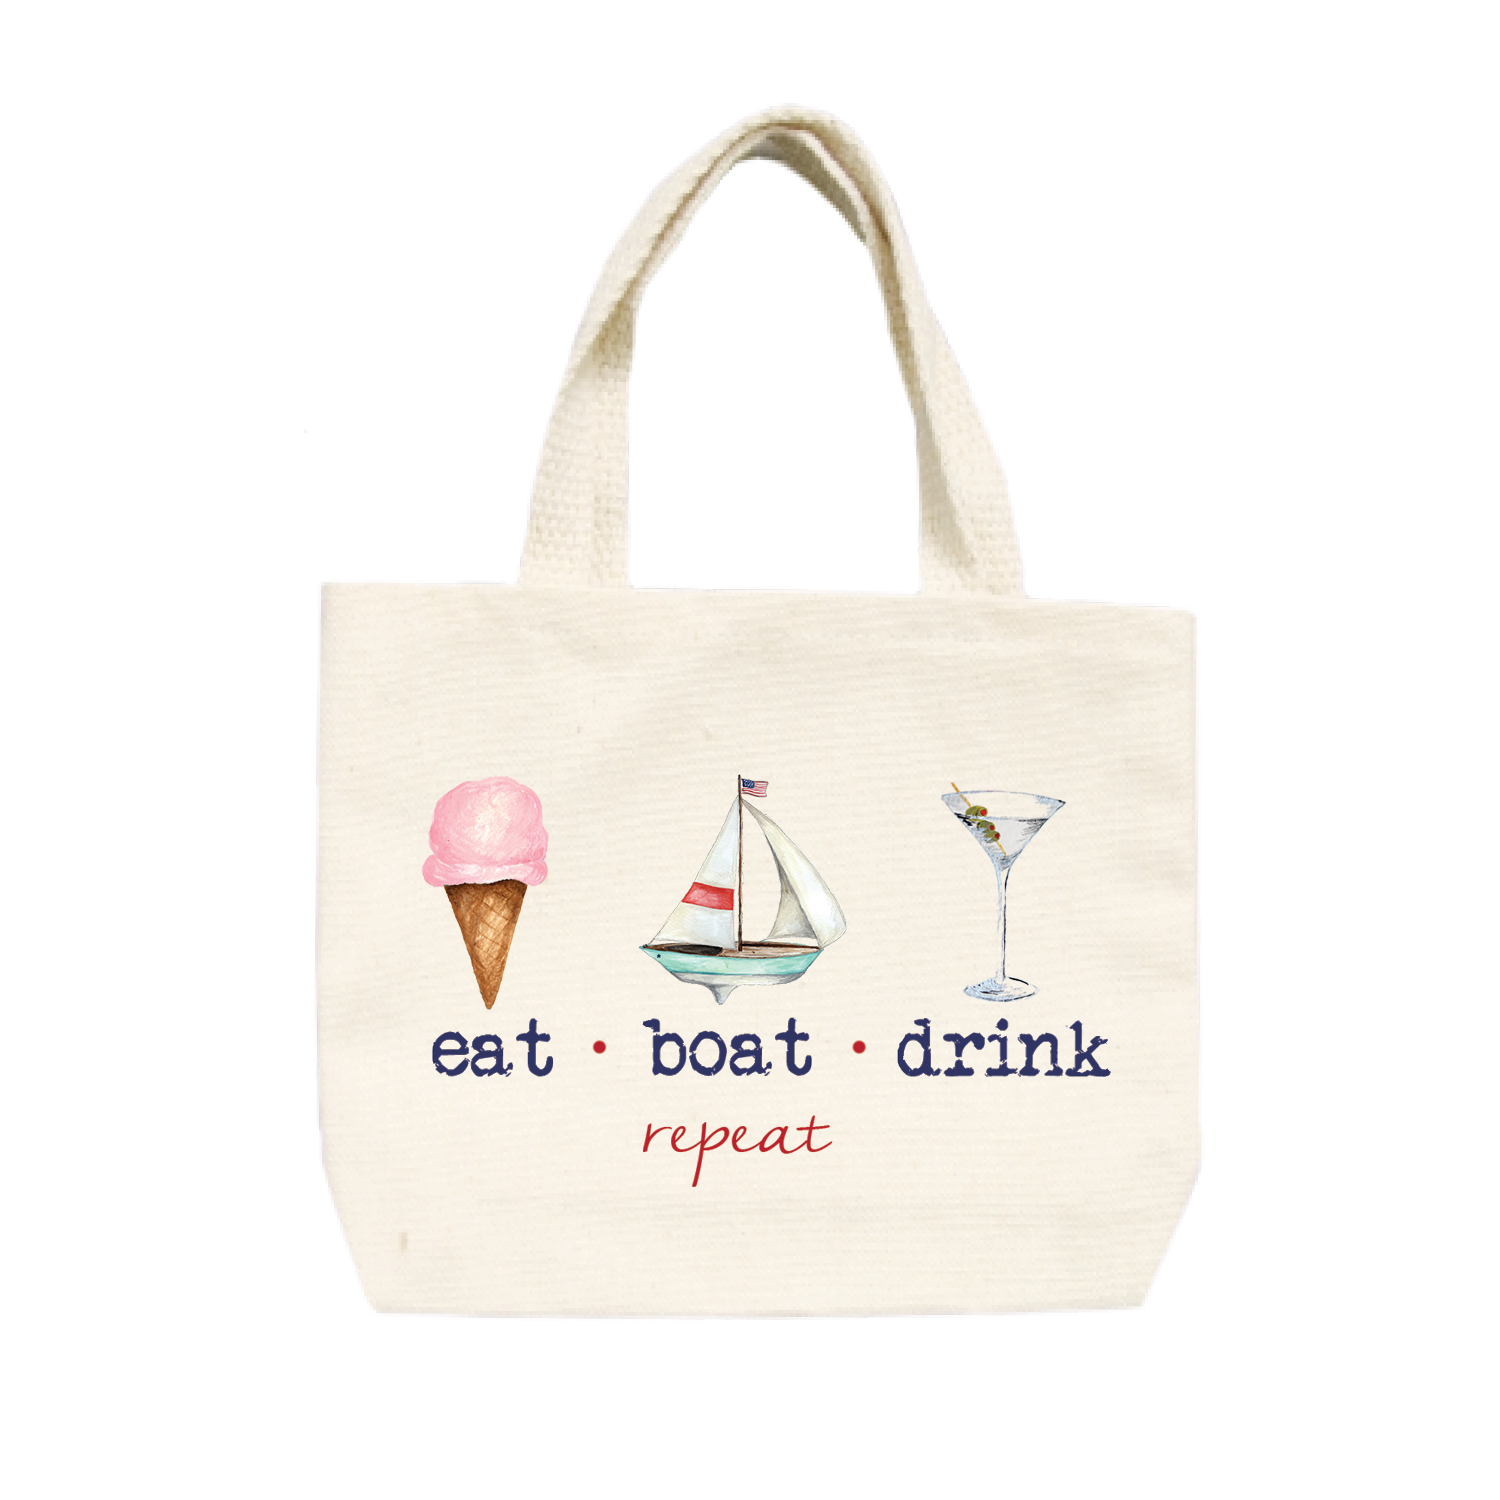 eat boat drink repeat small tote